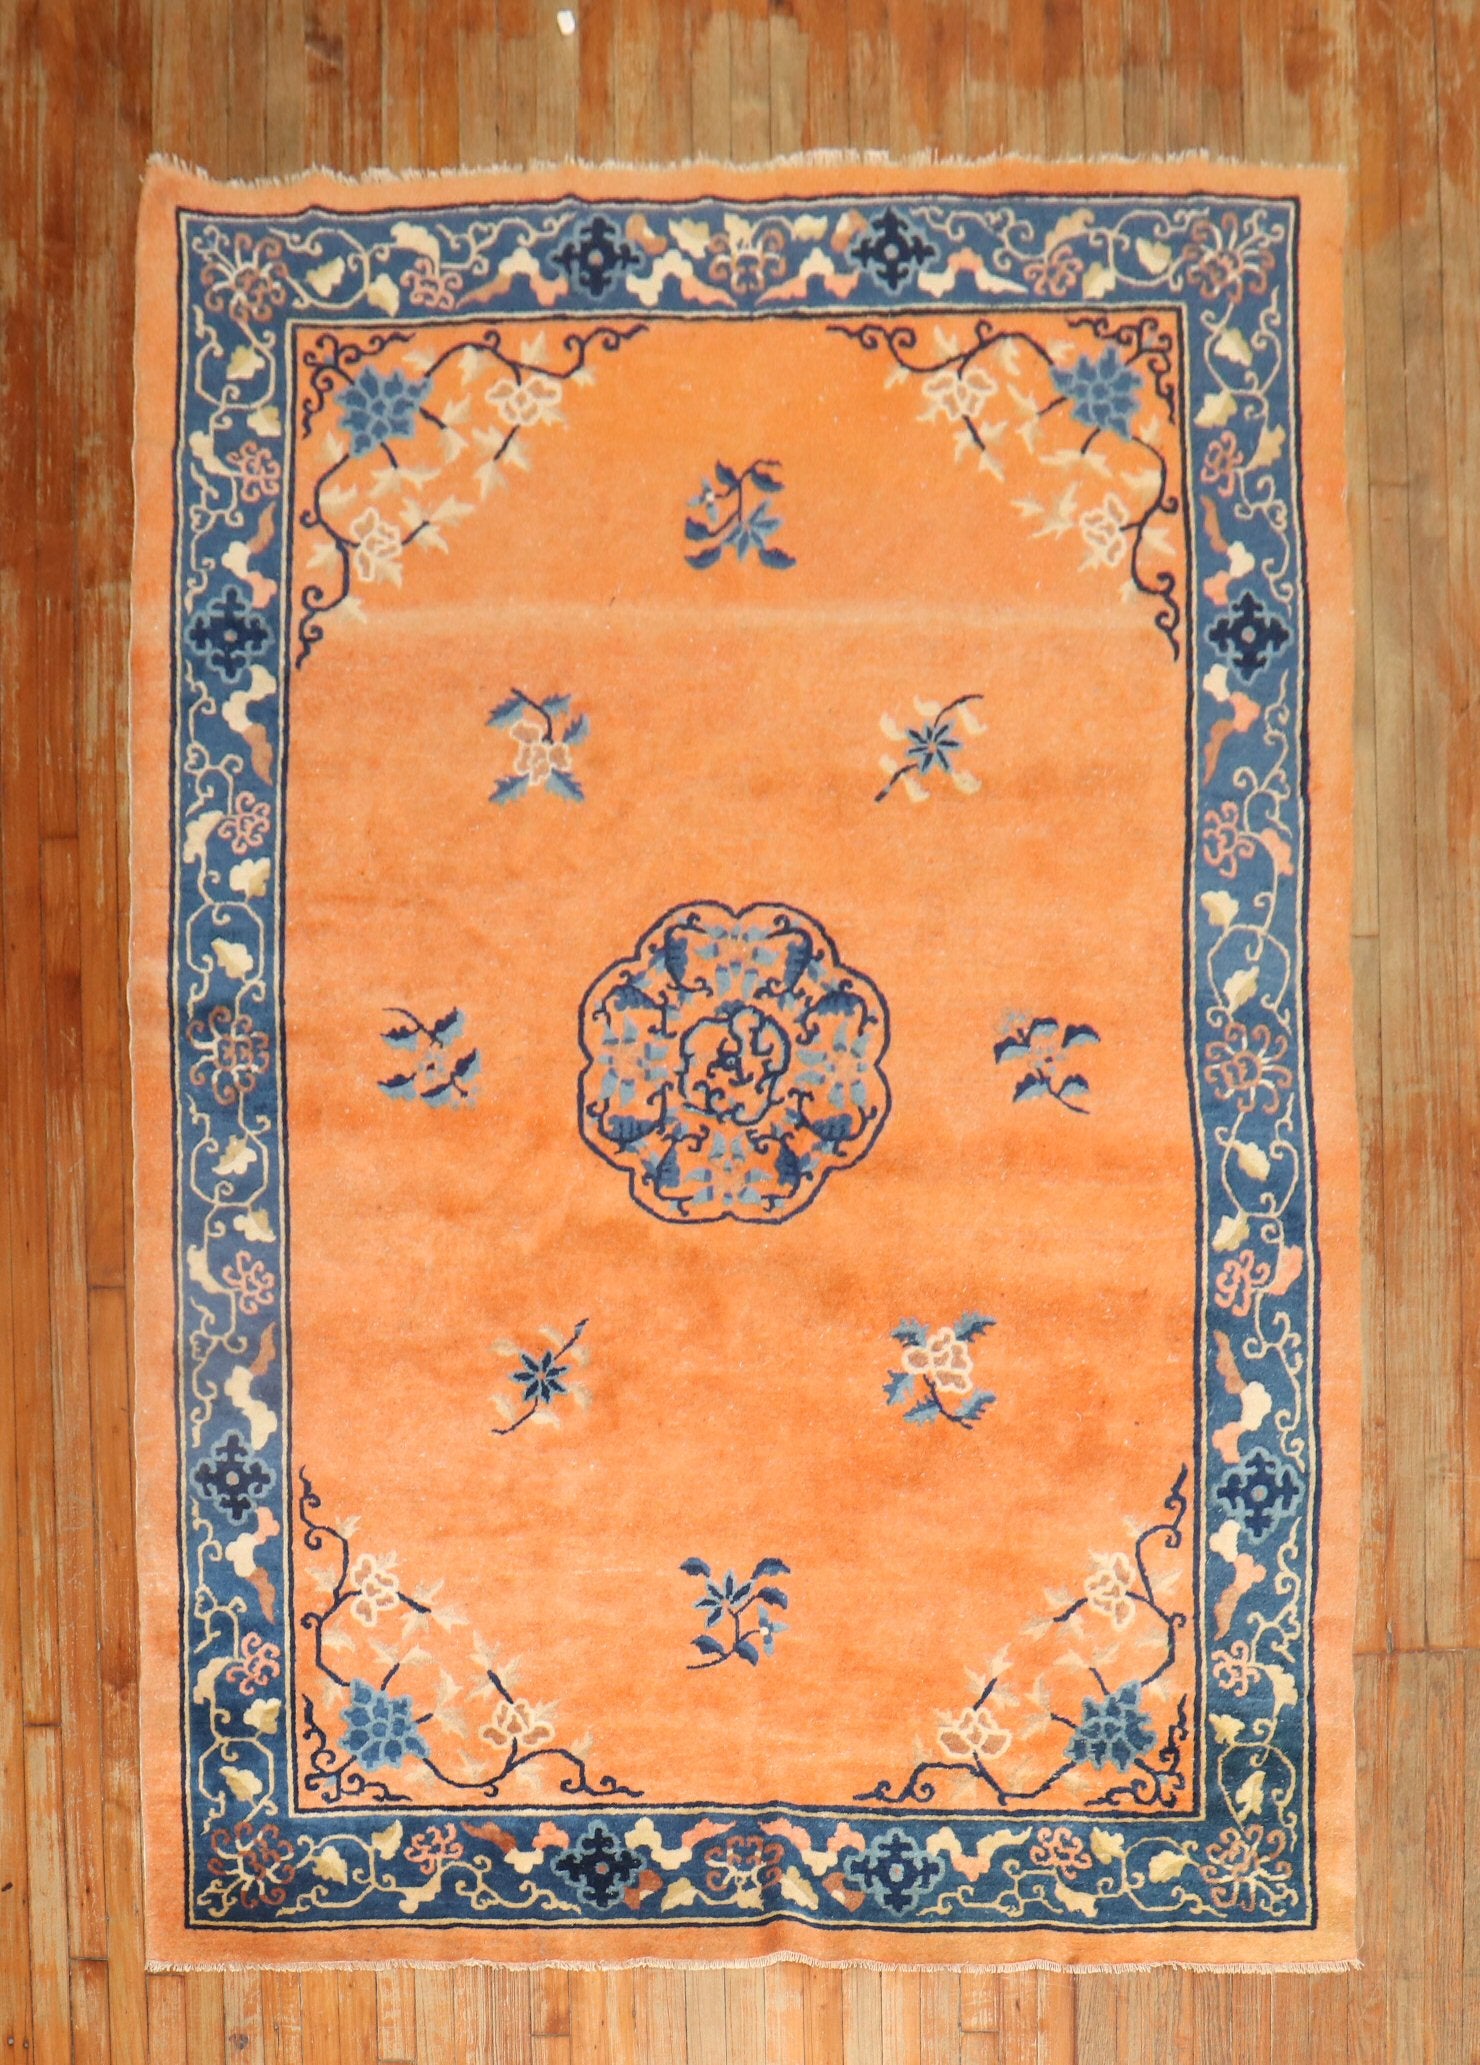 1930s Chinese Peking rug in a rare fire orange color

Measures: 5' 11